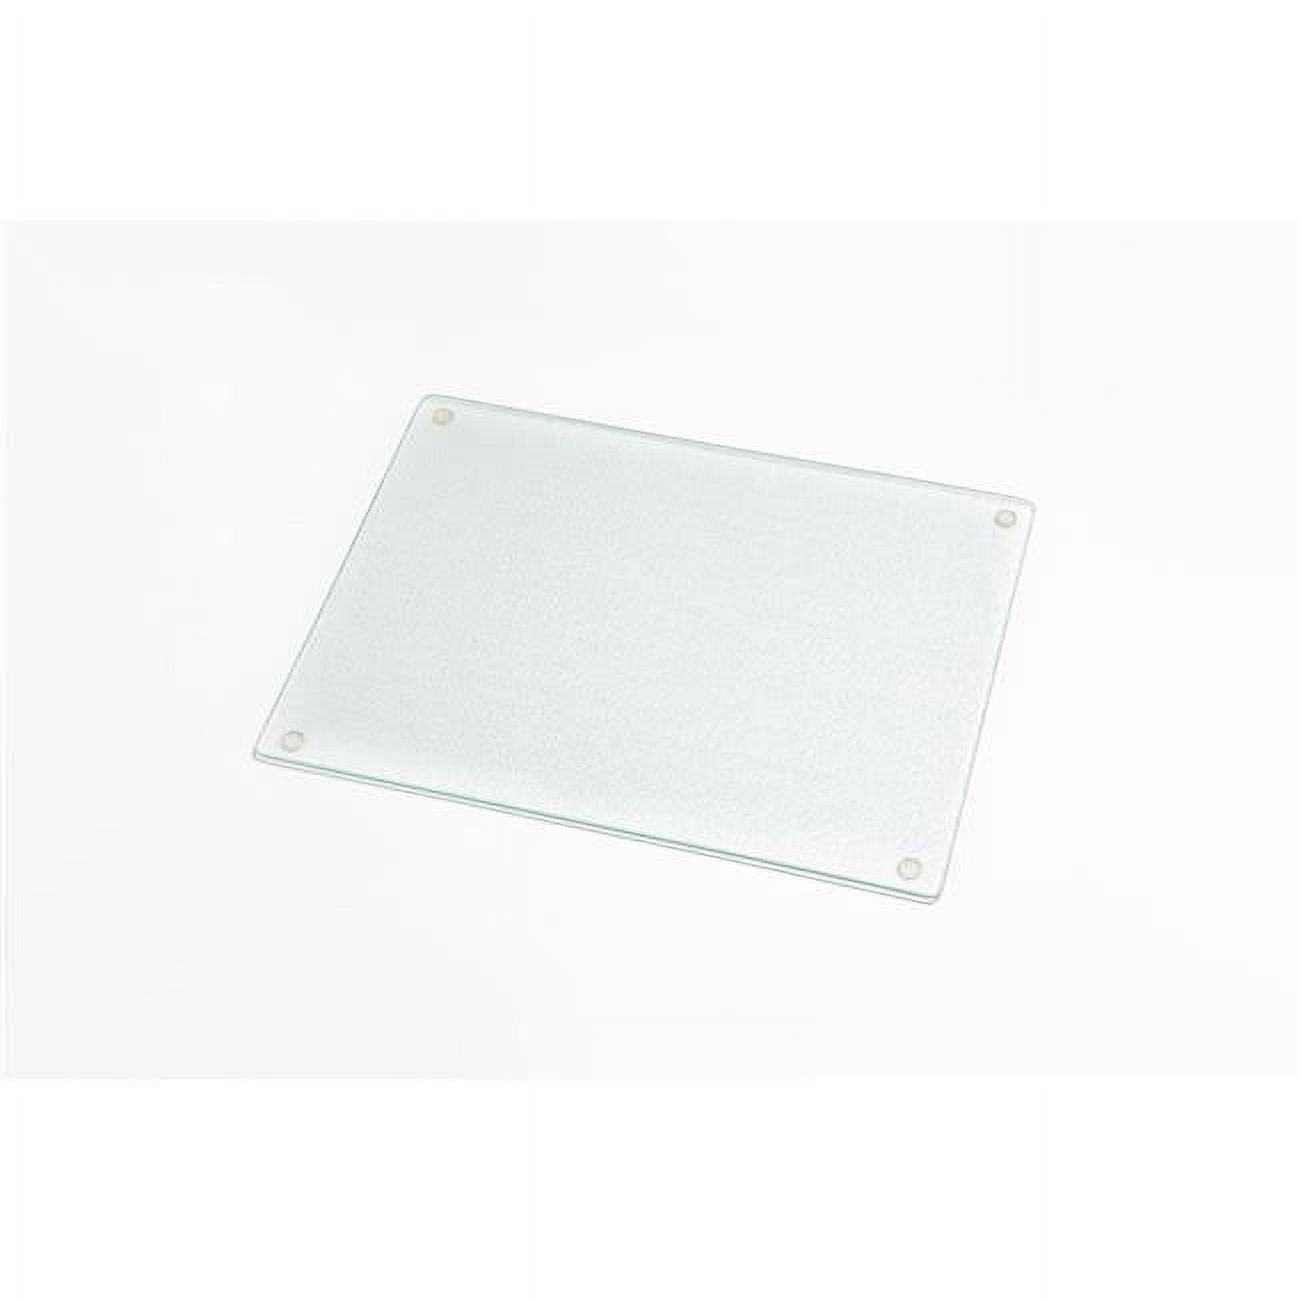 Picture of A&M Judaica & Gifts 57174 11.5 x 15.5 in. Tempered Glass Tray